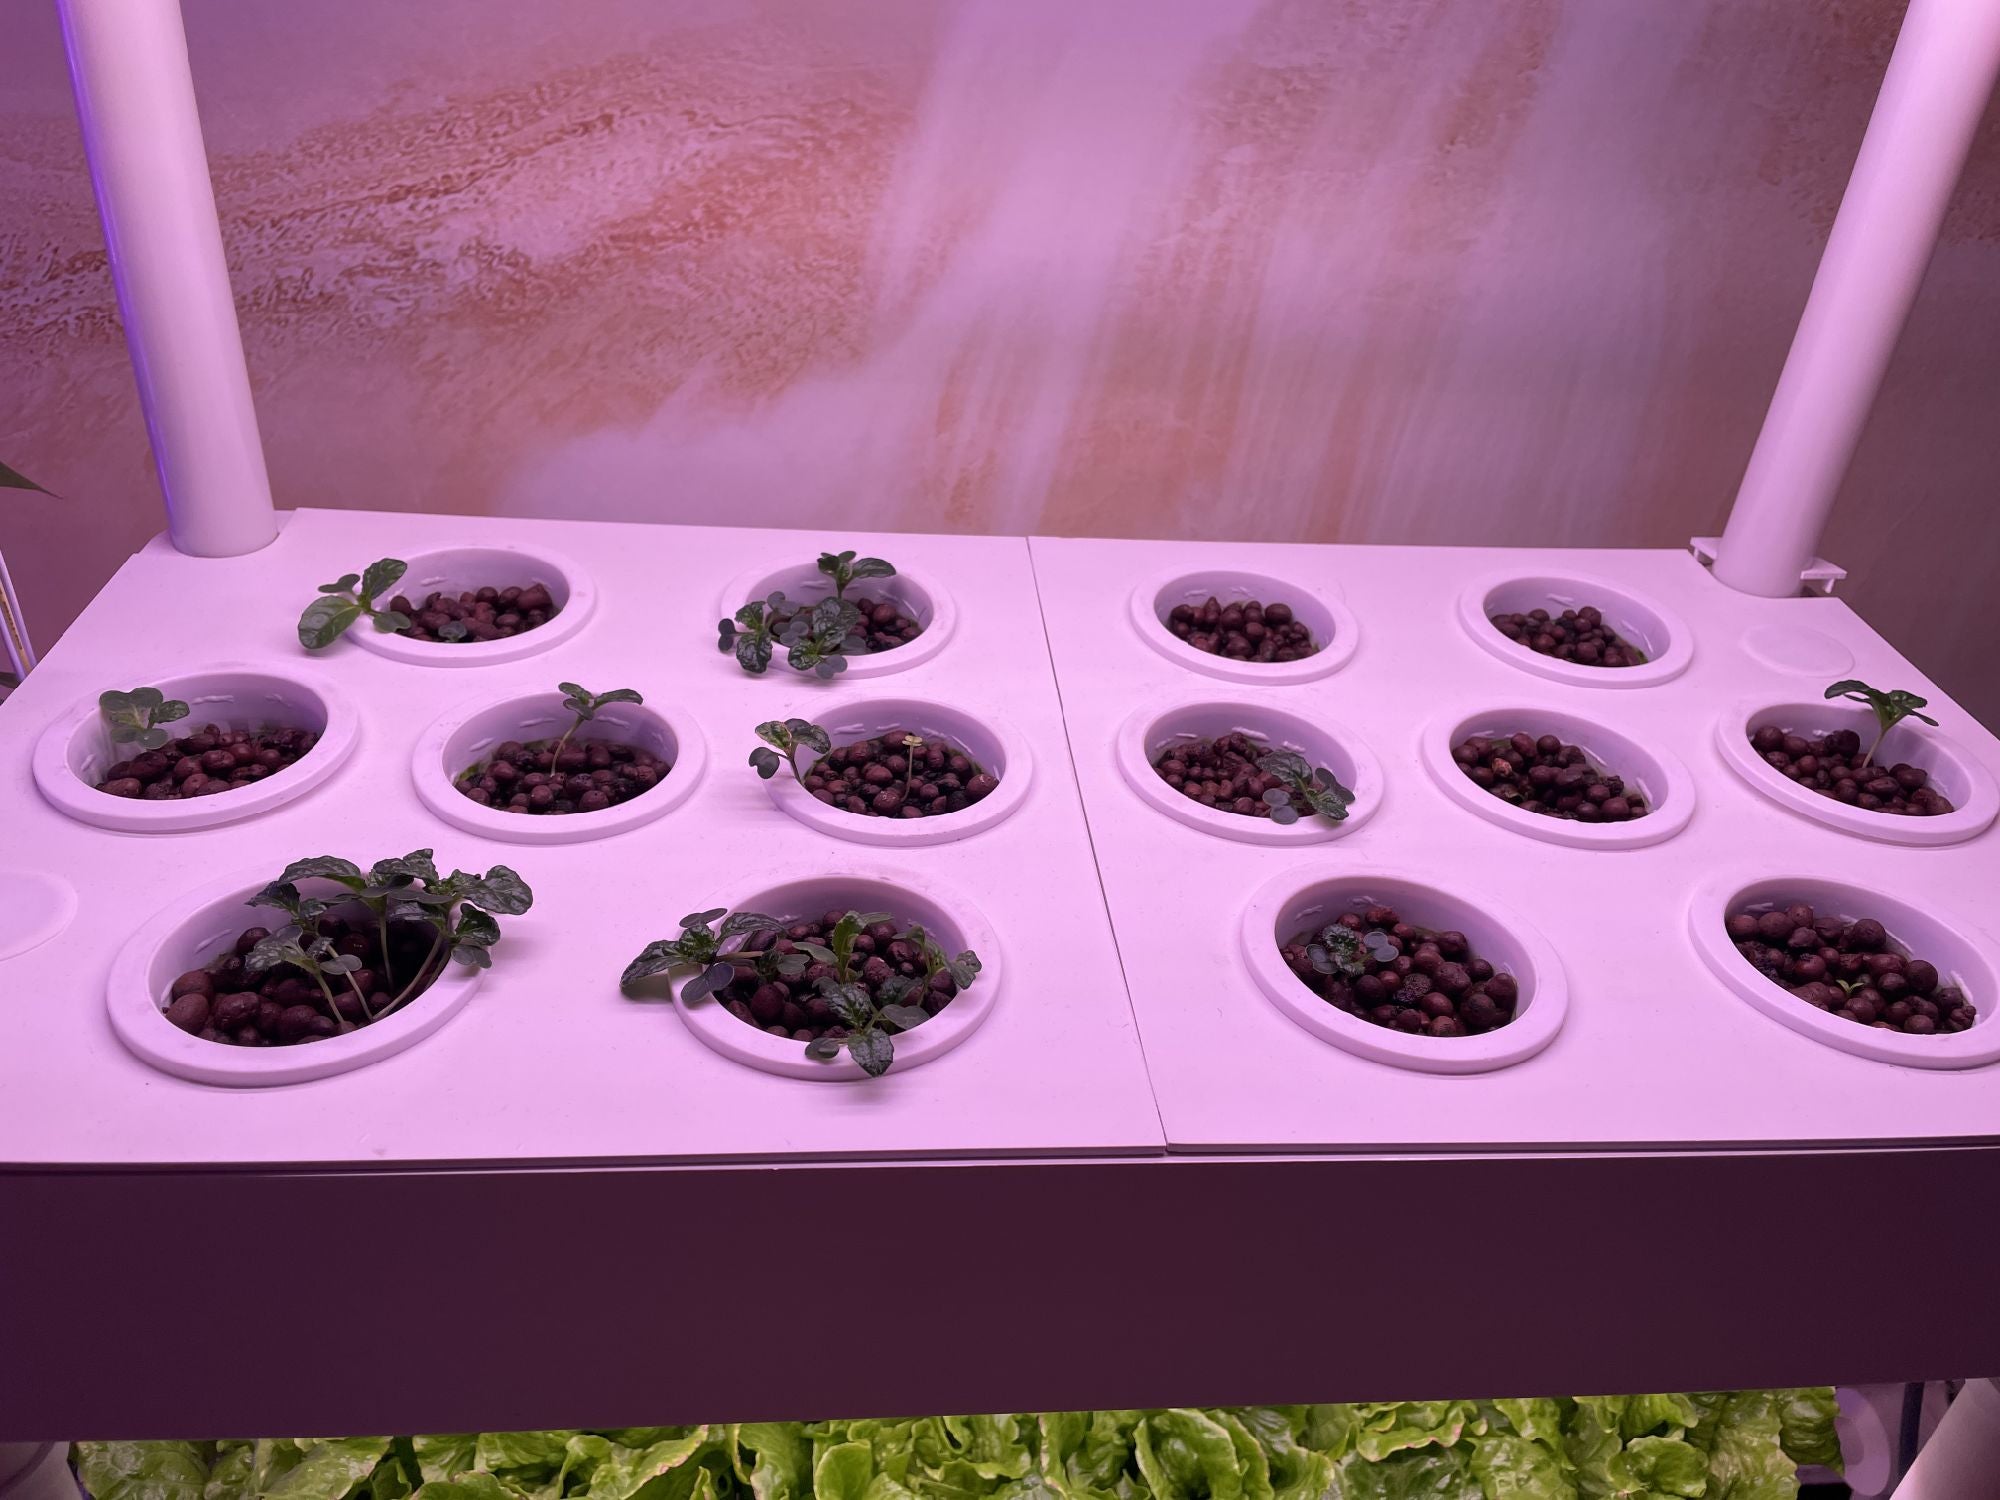 4 Layers 56 Holes Vertical Hydroponics Growing System with LED Light